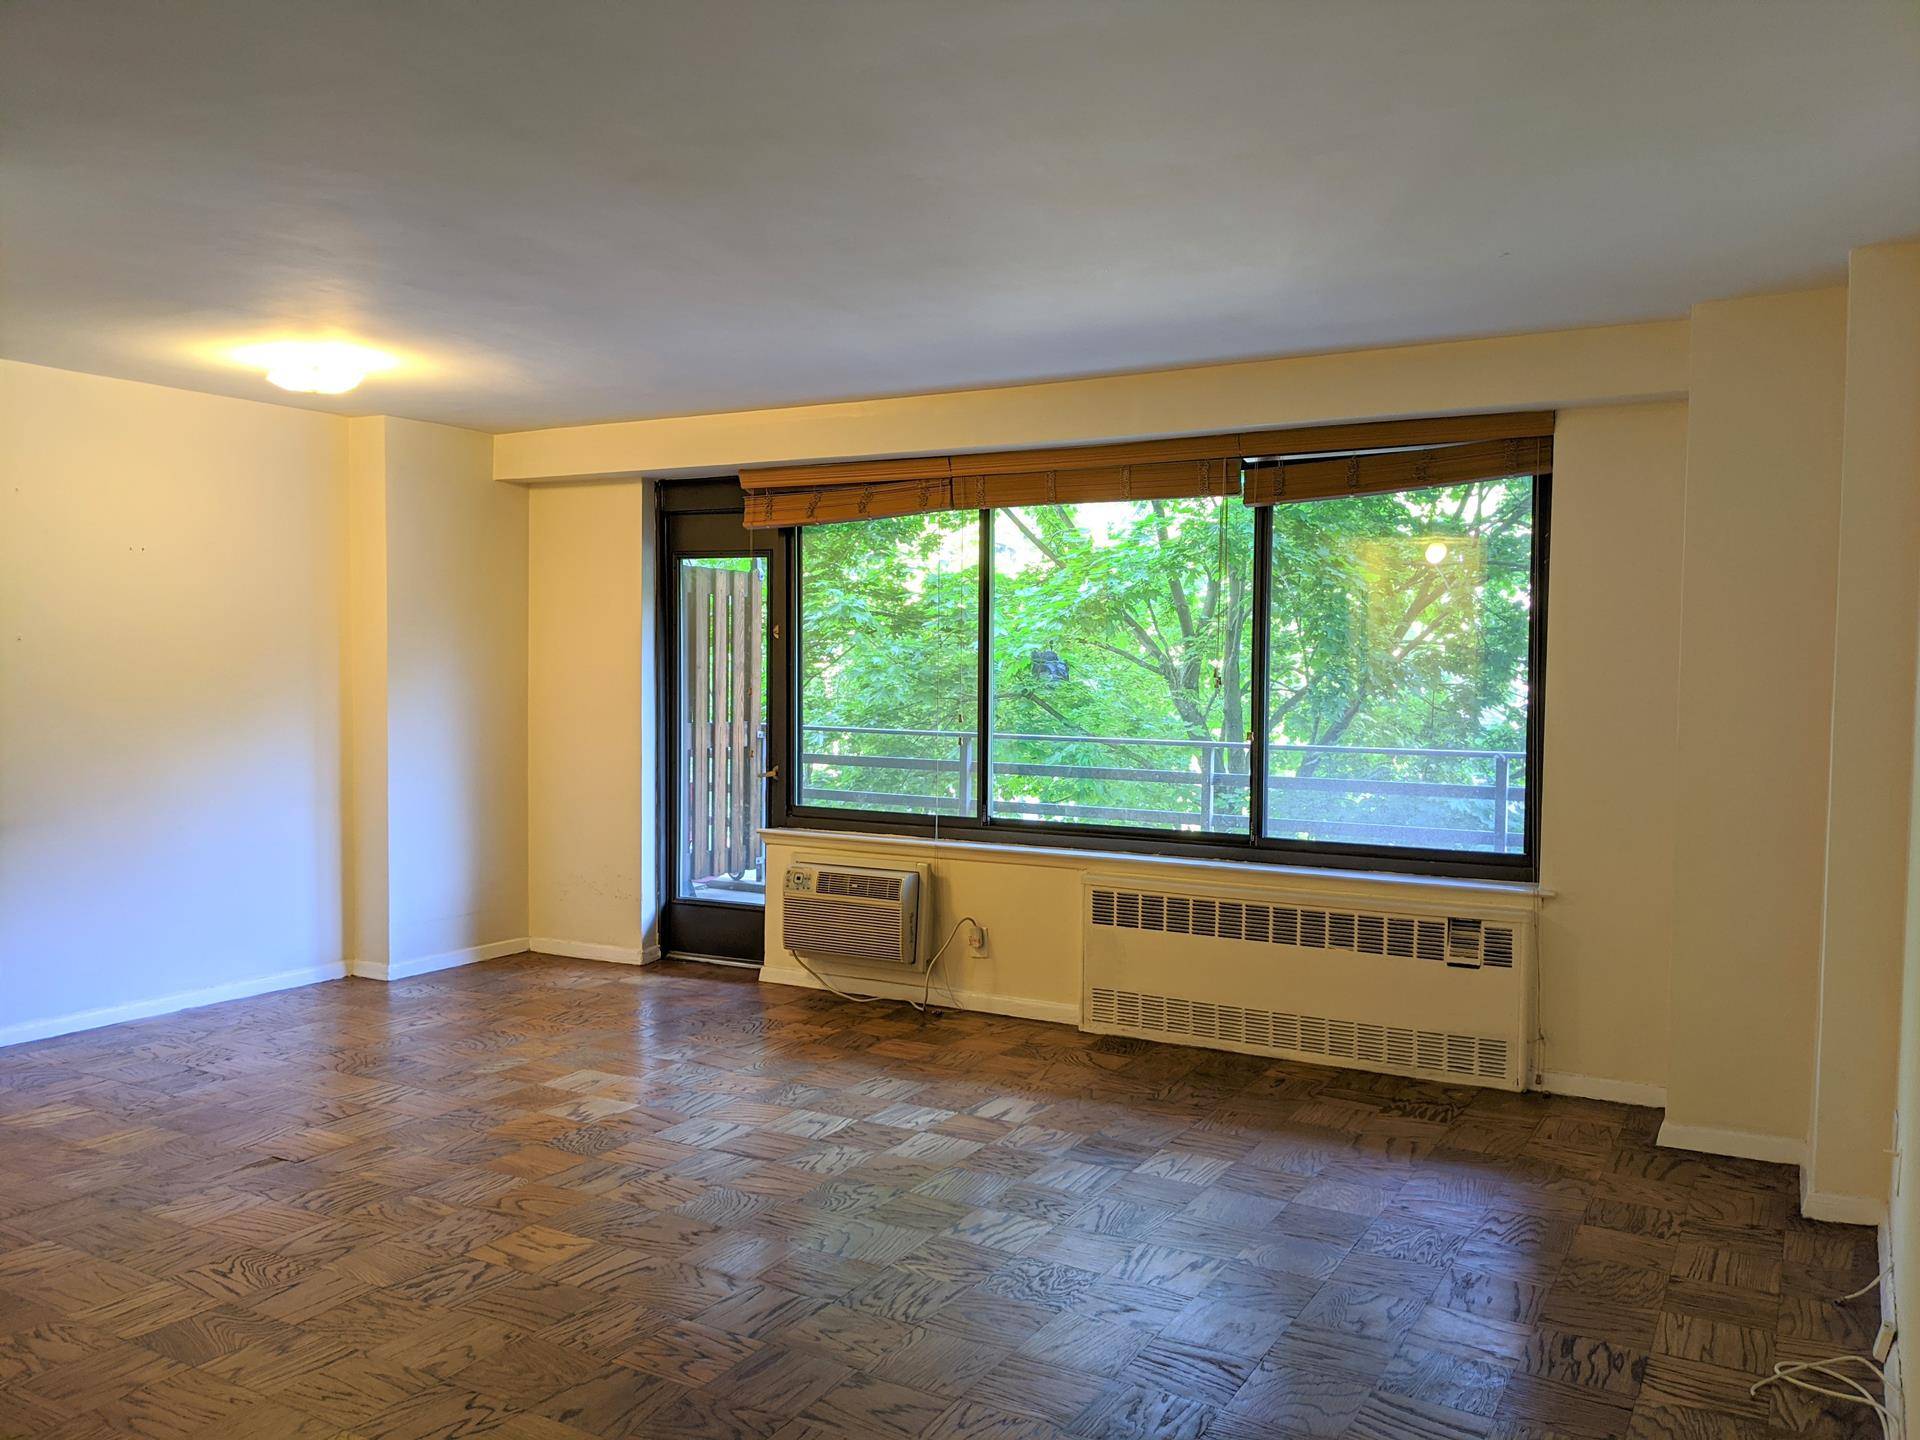 No Brokerage Fee. Spacious 1 bedroom, 1 bathroom apartment located next to Central Park and all the finest things the Upper West Side has to offer.